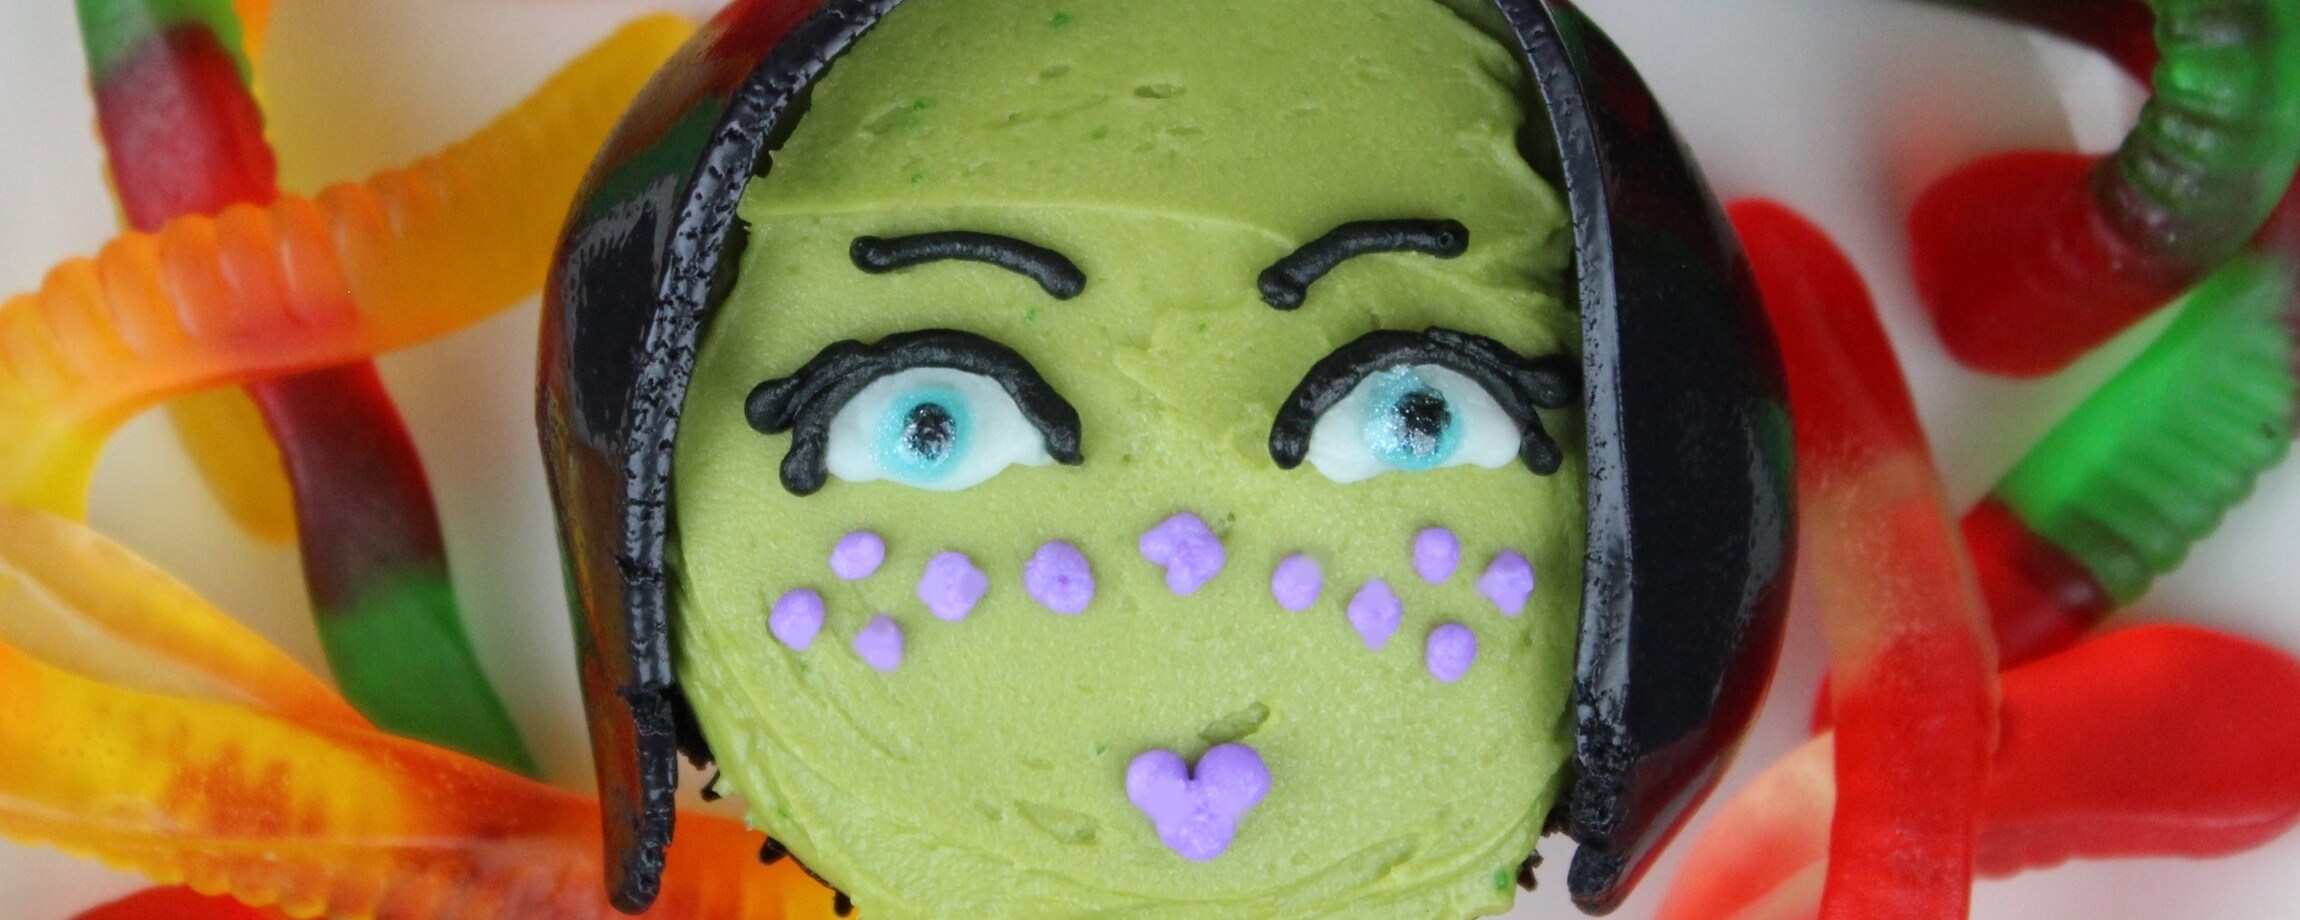 A cupcake decorated to look like Jedi knight Barriss Offee on top of gummy worms.